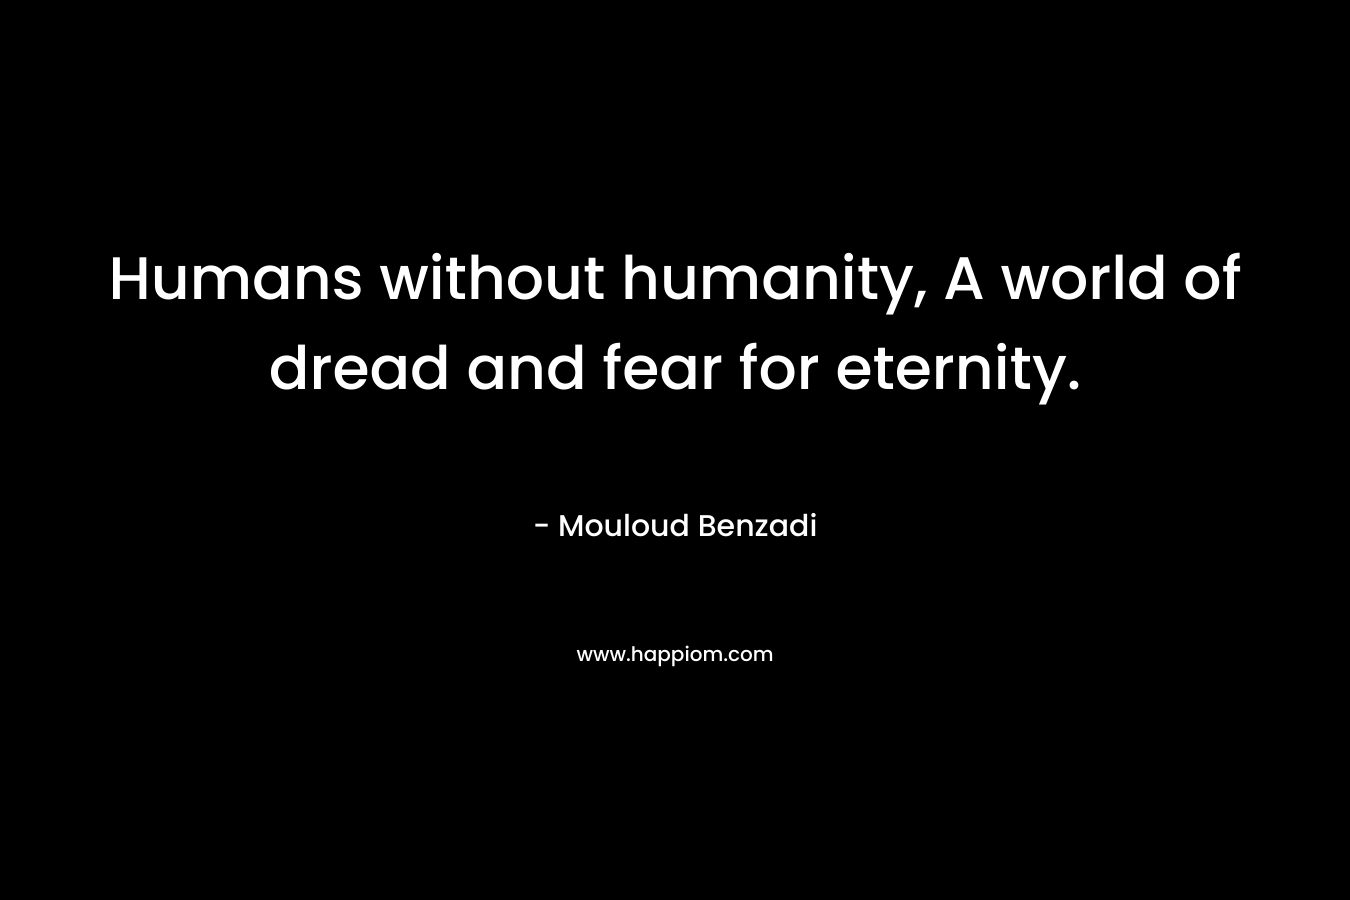 Humans without humanity, A world of dread and fear for eternity.